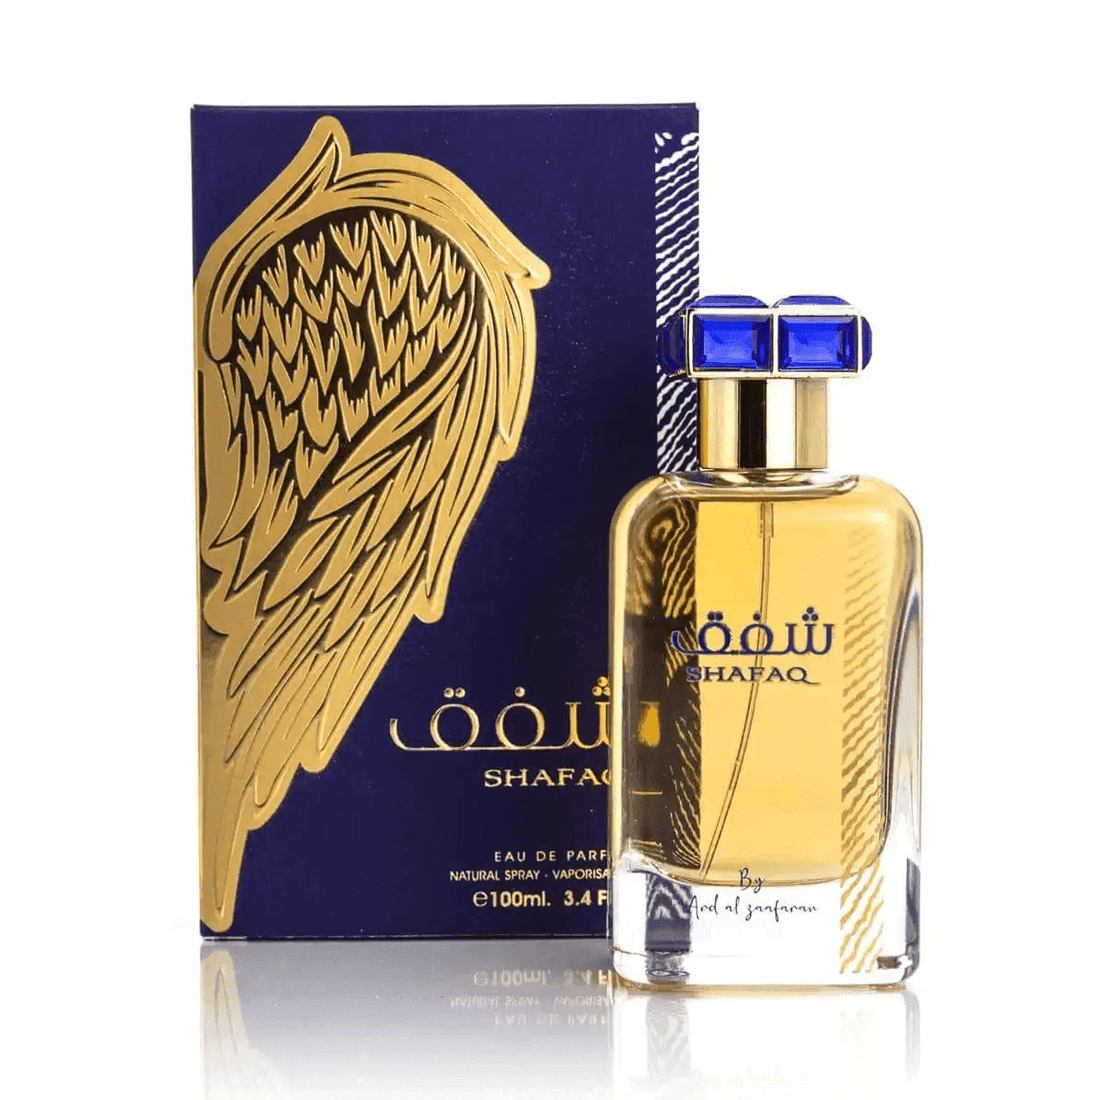 Image of Shafaq Eau De Parfum, the elegant fragrance combining floral and oriental elements with a hint of vanilla, for both men and women.